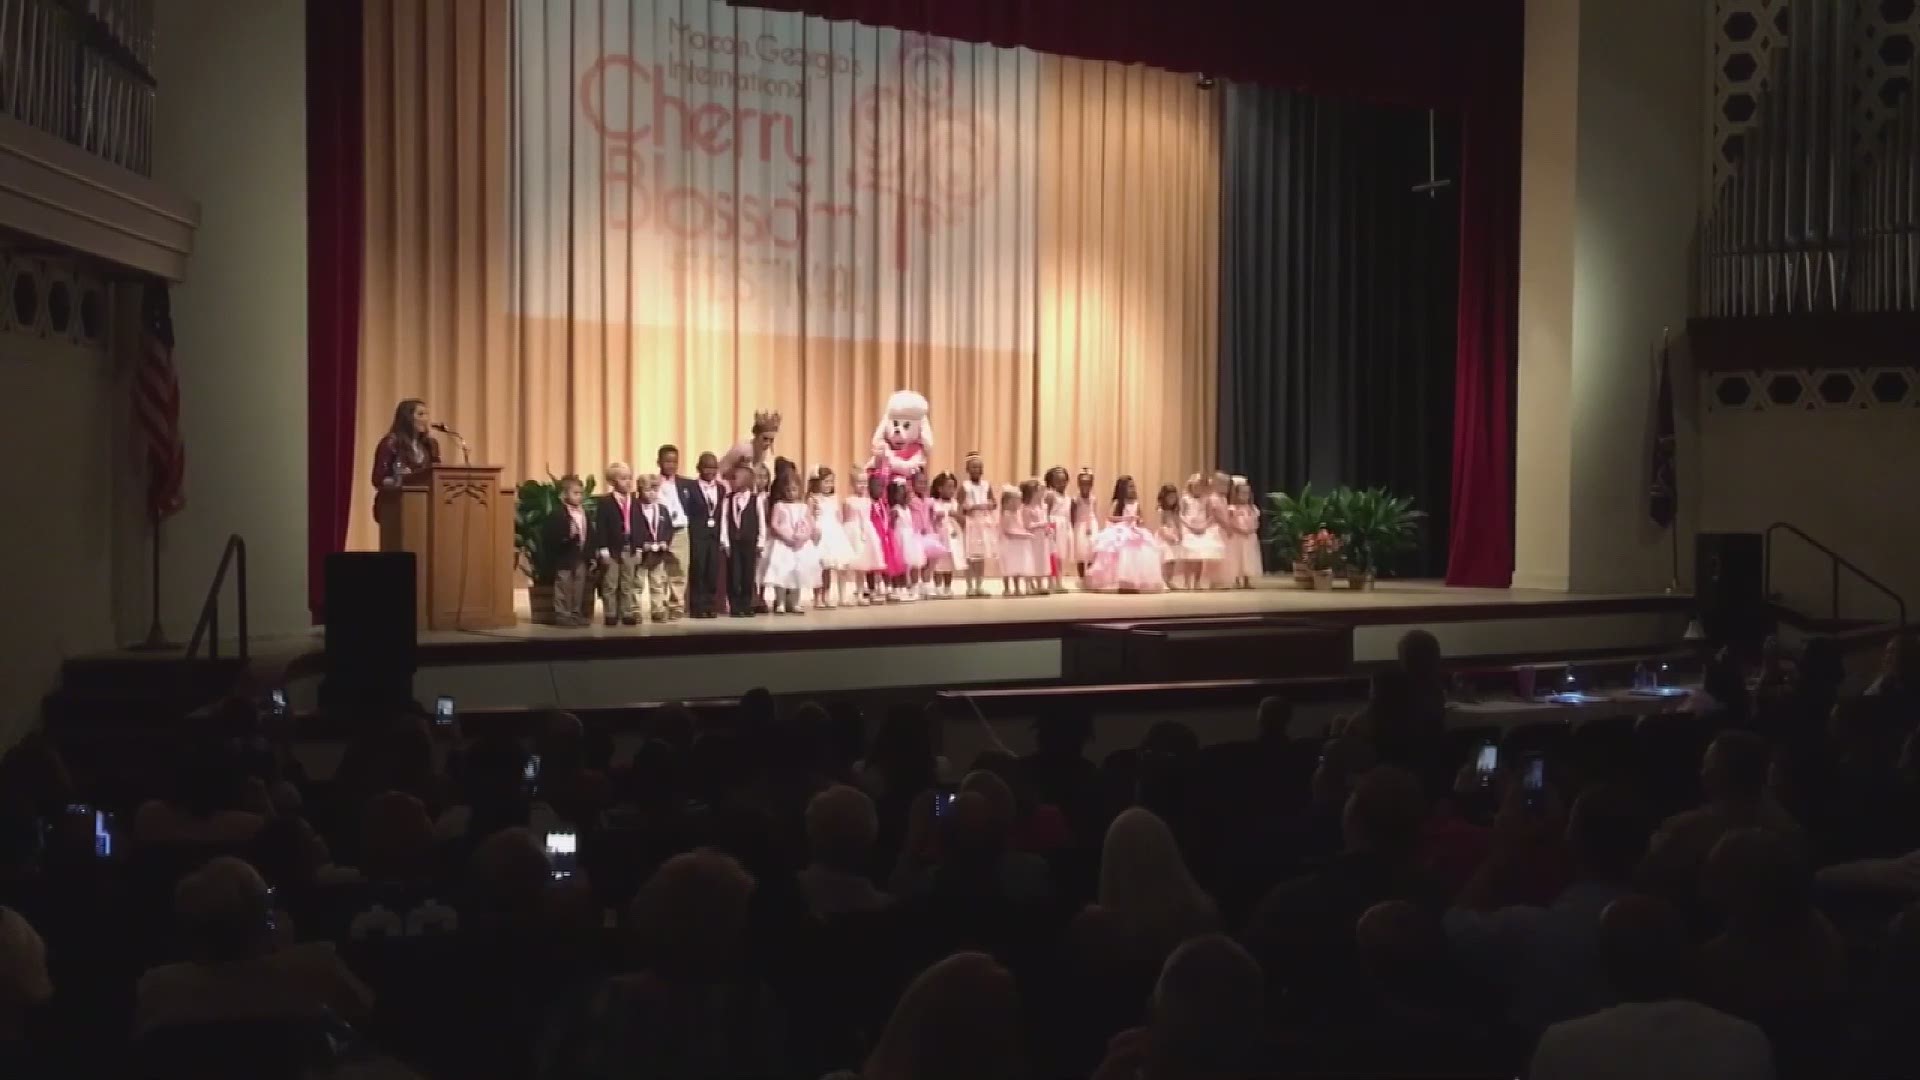 Adalaide Richardson was crowned the new Little Miss Cherry Blossom and Walden Weatherford was crowned the new Little Mr. Cherry Blossom.